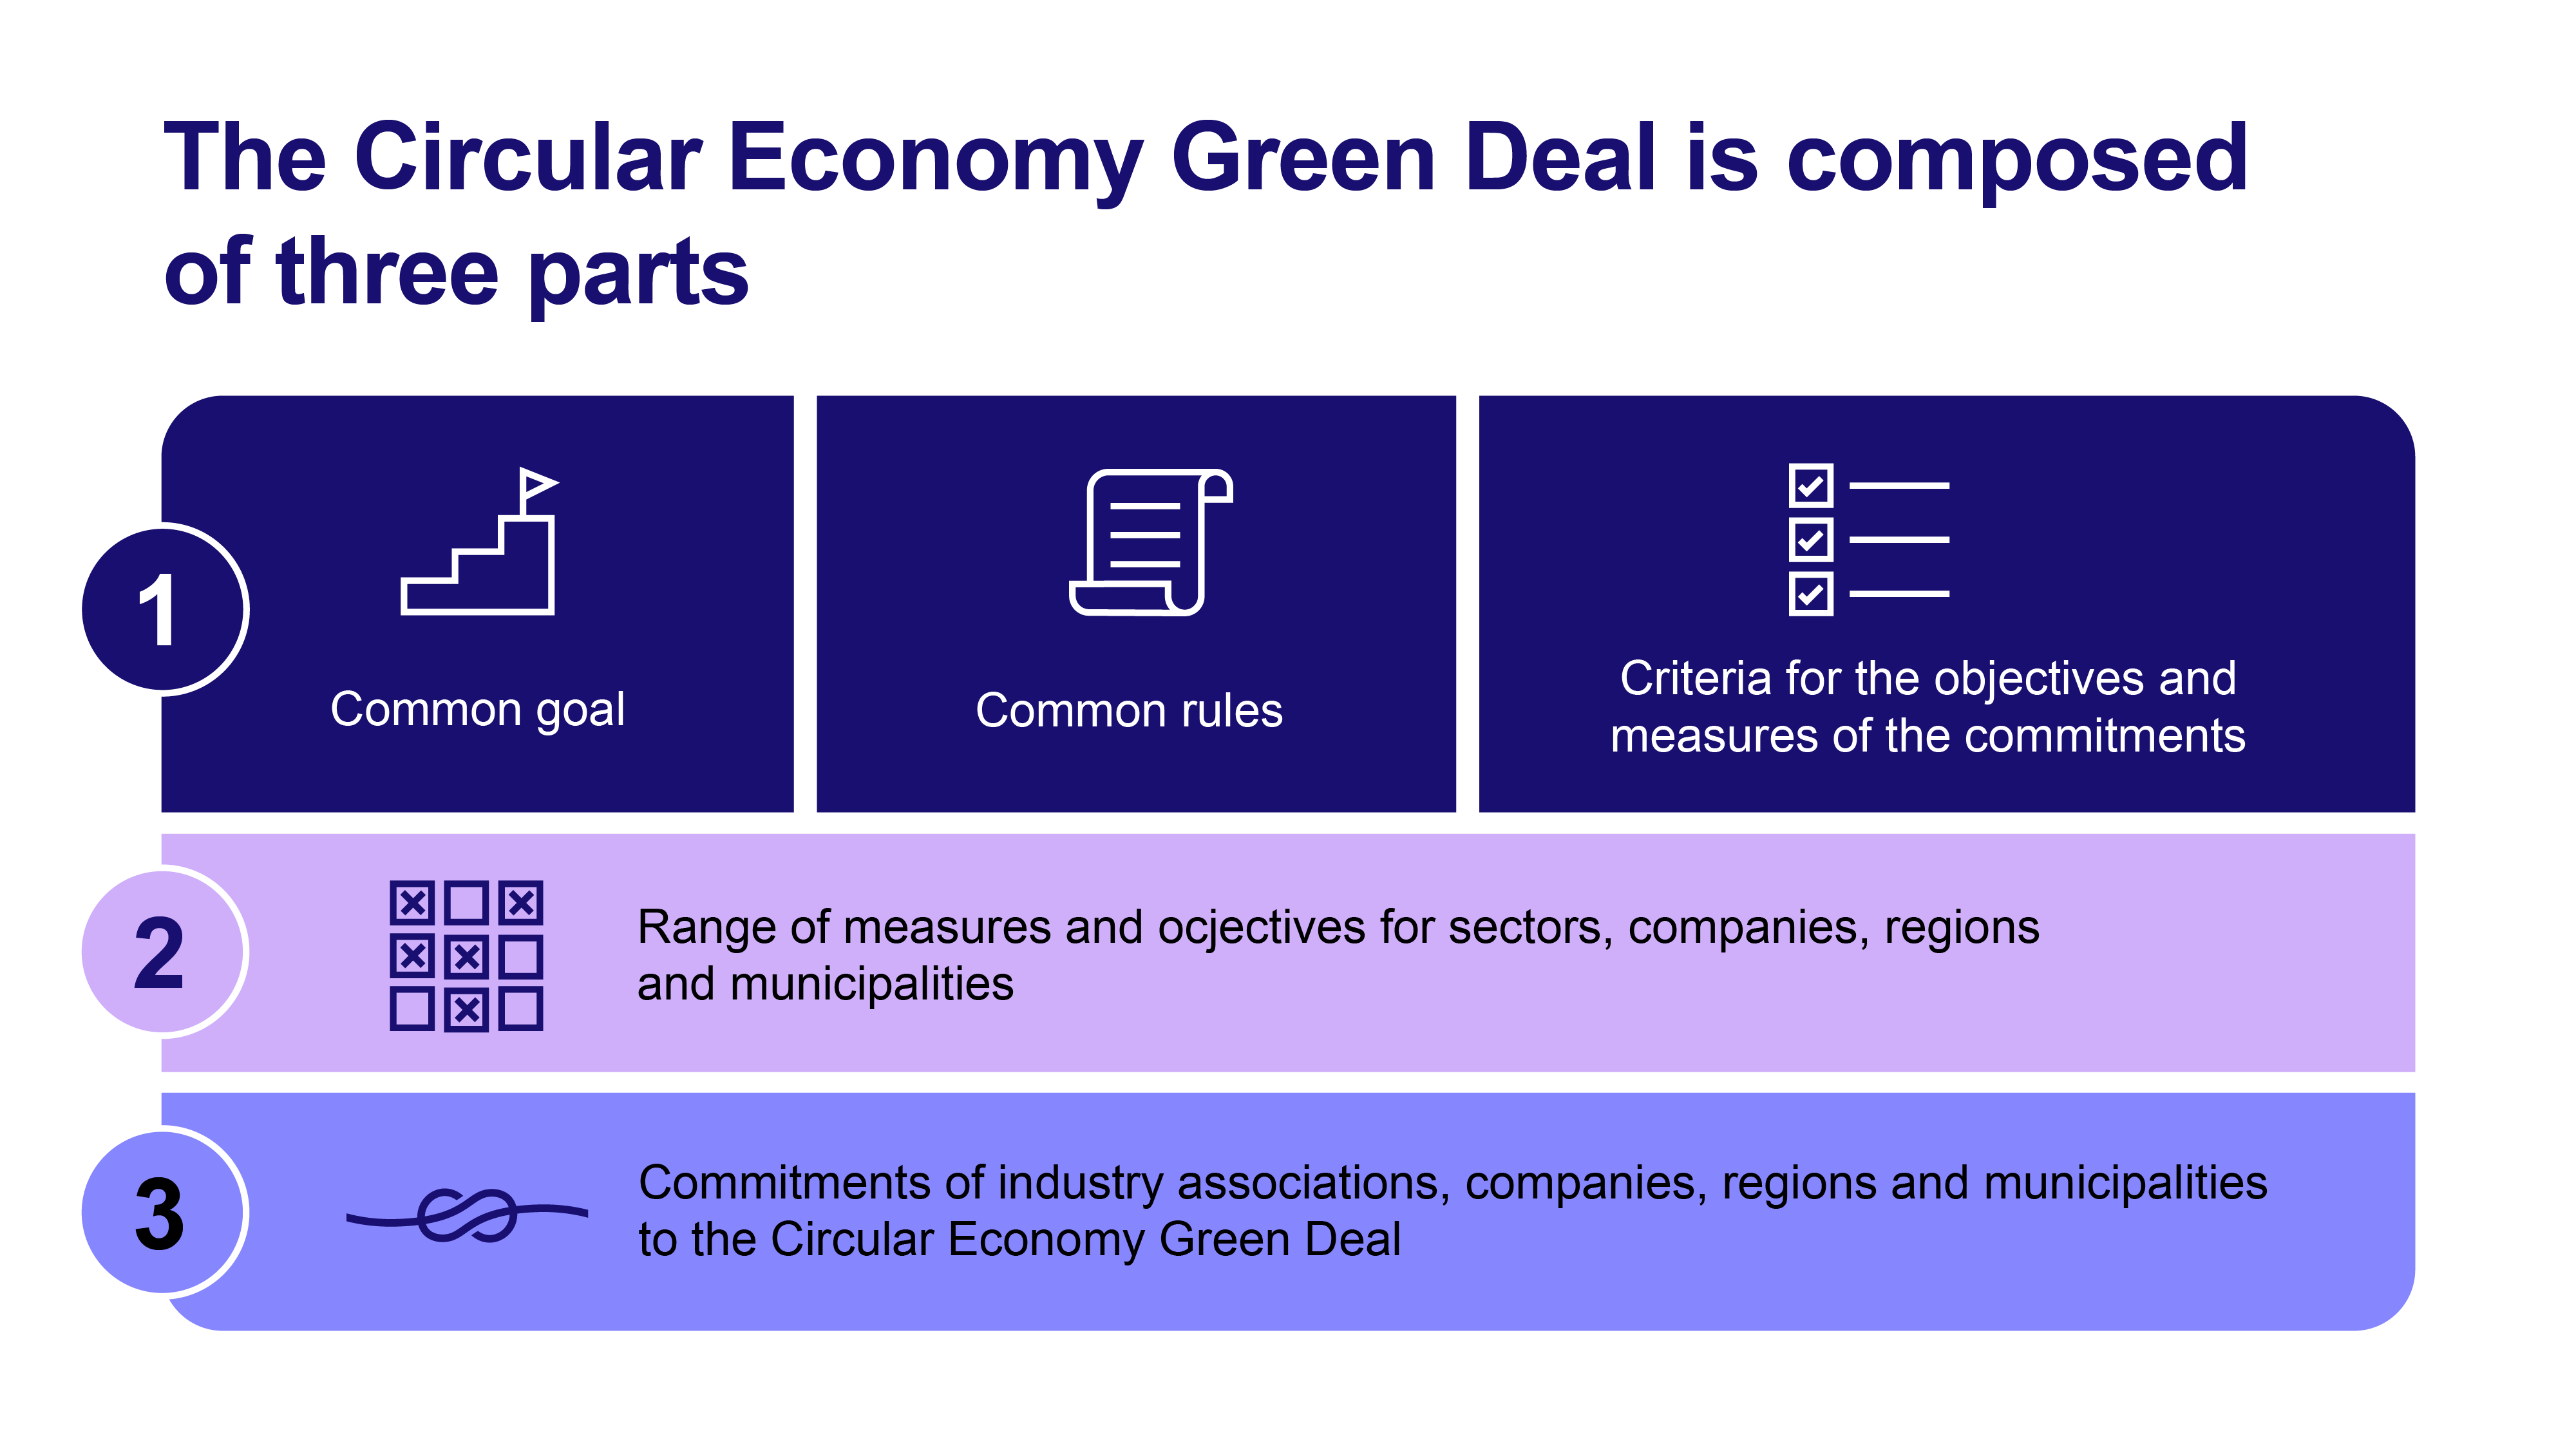 The Circular Economy Green Deal is composed of three elements. First of all, we have a common goal, common ground rules and criteria for the objectives and measures of the commitments. Second, there is the range of measures and objectives of sectors, companies, regions and municipalities. The third element are the commitments by which sectors, companies, regions and municipalities join the Circular Economy Green Deal.